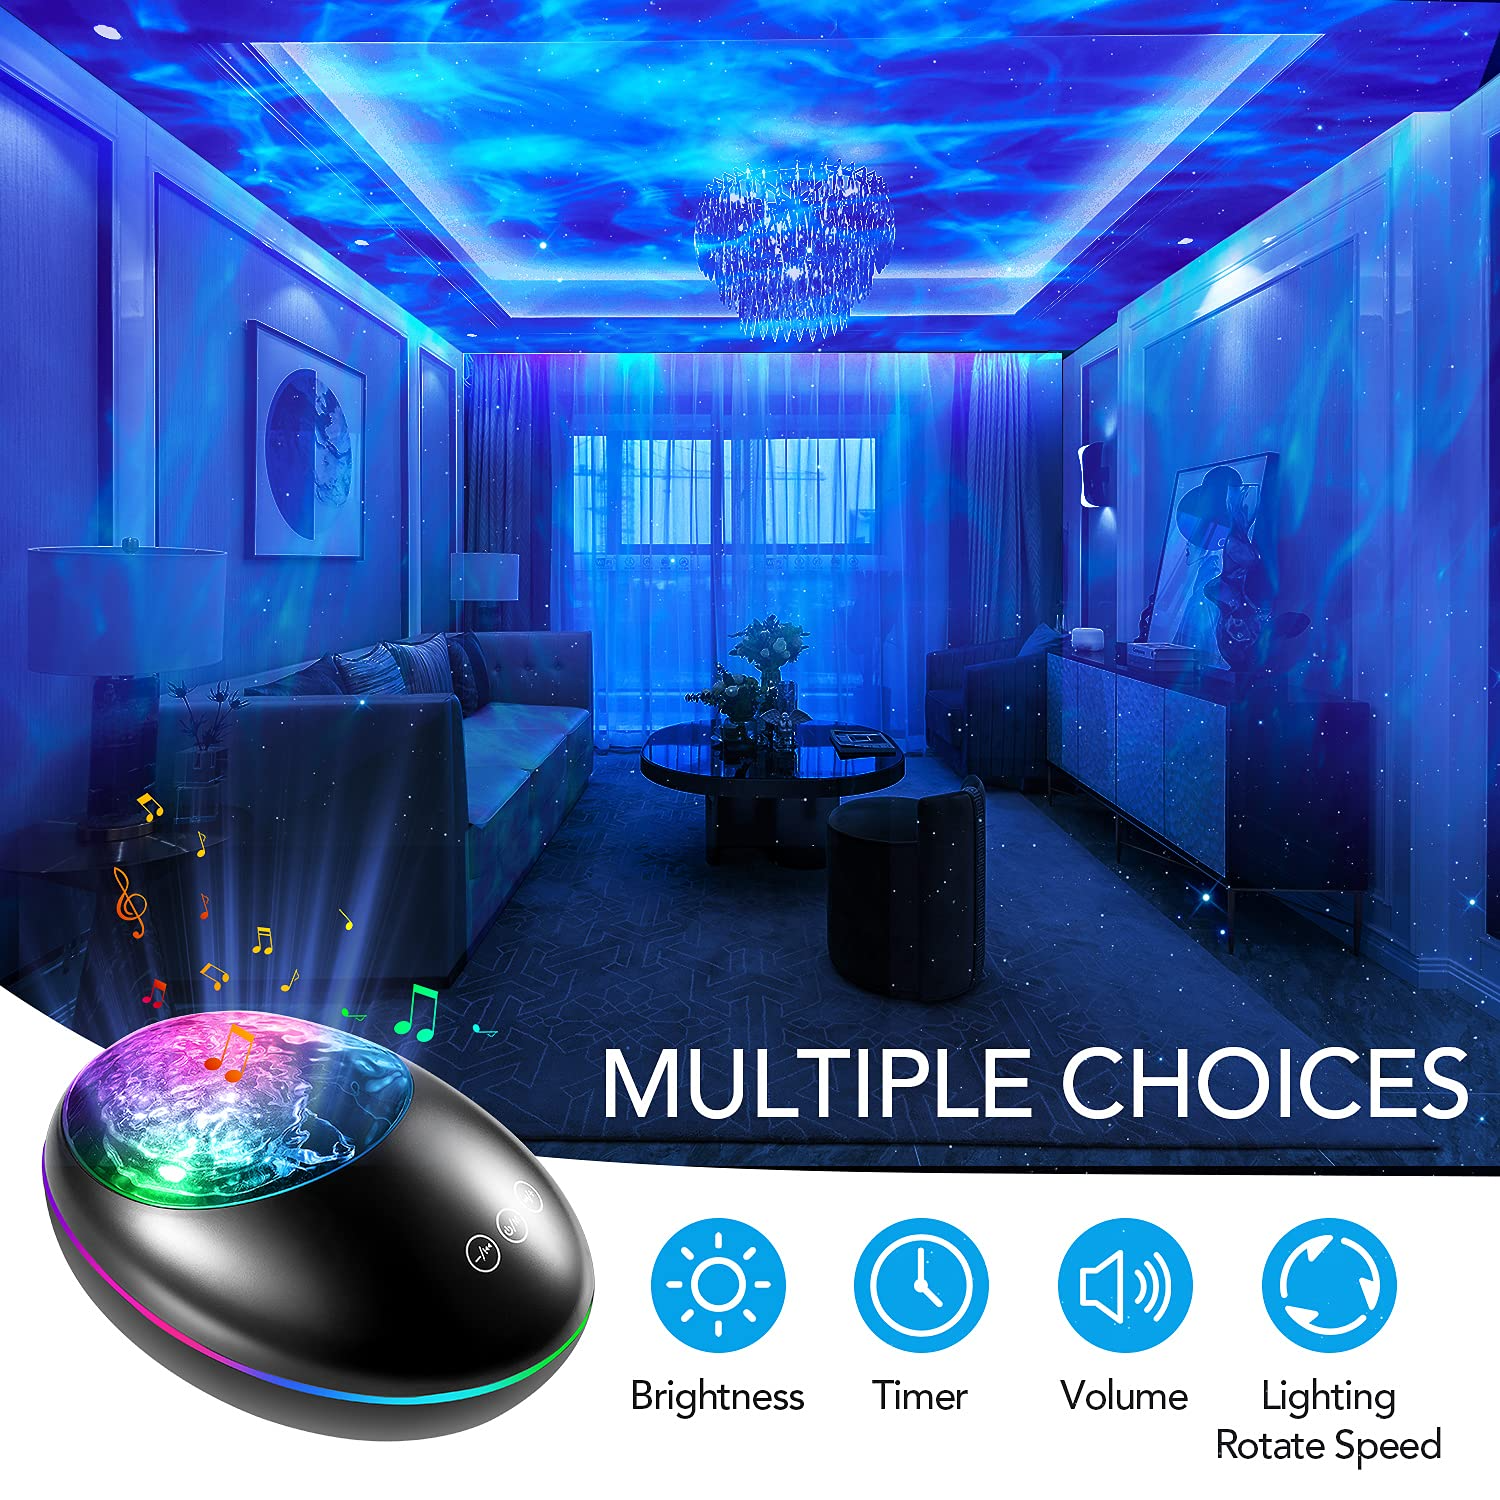 Galaxy Projector,Night Light Projector Star Projector Bedroom Ocean Wave Projector Kids White Noise Music Bluetooth Starlight,Star Projector Lamp Ceiling Timer Sensory Led Adults Teen Gift Room Remote